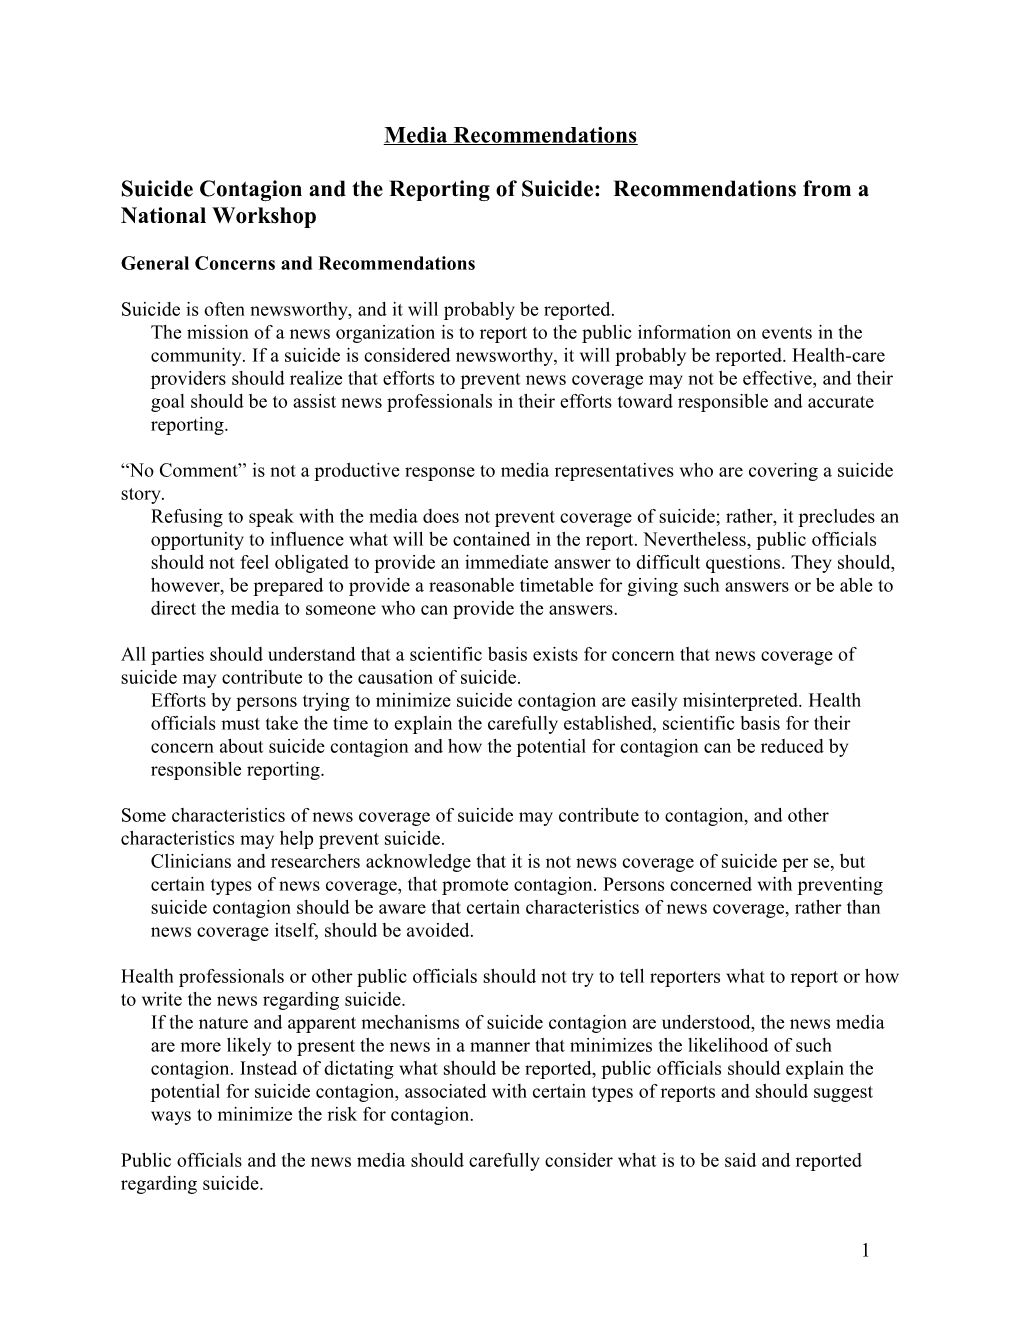 Suicide Contagion and the Reporting of Suicide: Recommendations from a National Workshop